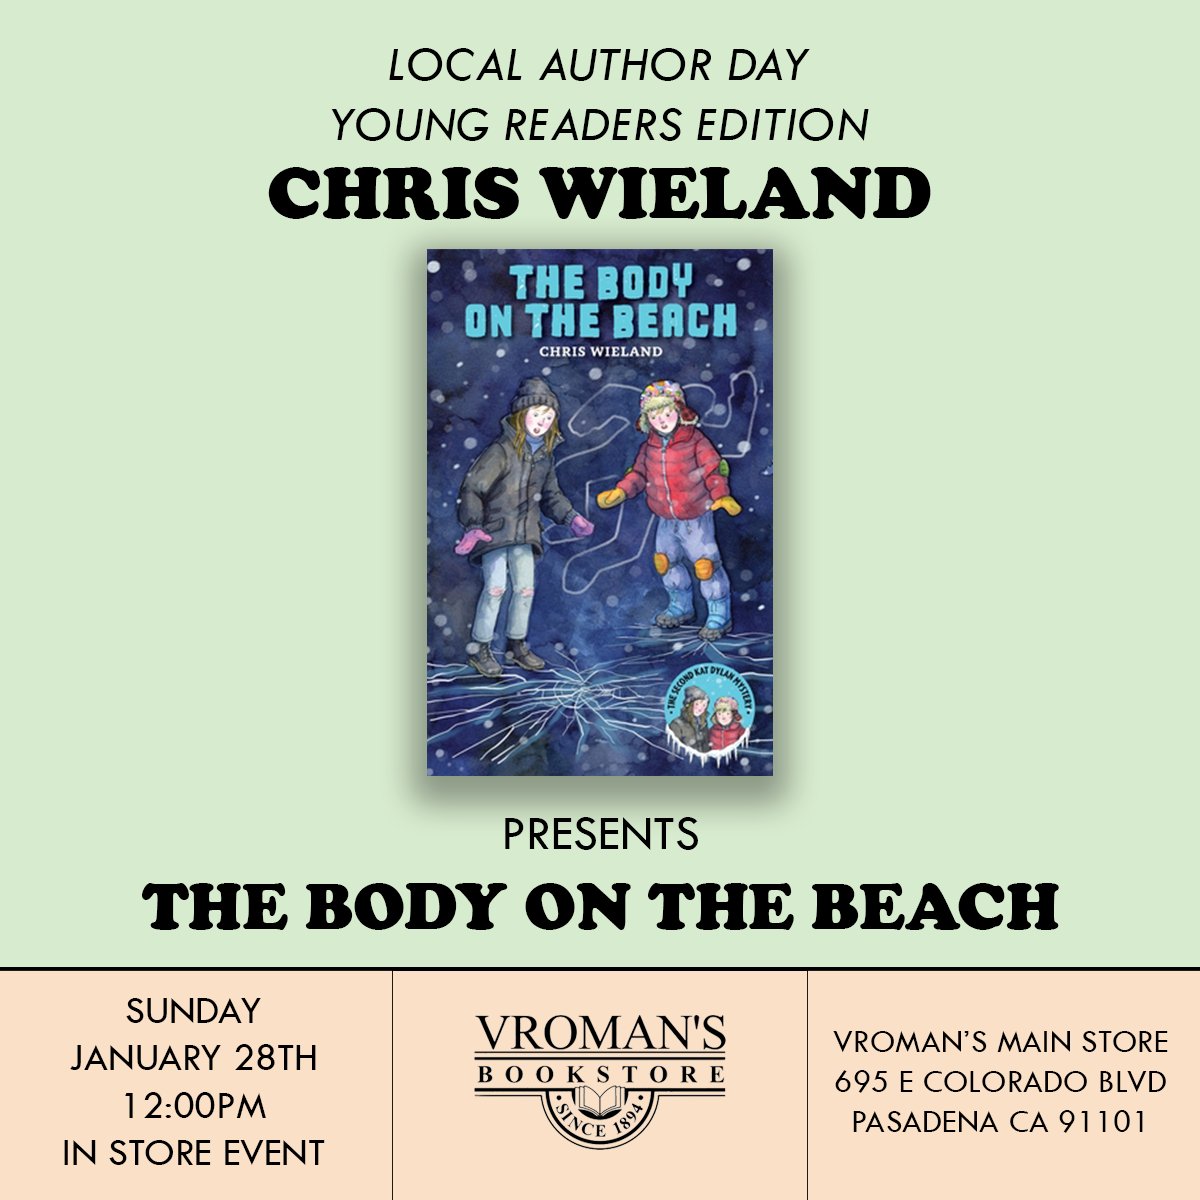 Join our Open Book committee member and author, Chris Wieland, at @VromansBookstore this Sunday, January 28th at 12pm for Local Author Day - Young Readers Edition!